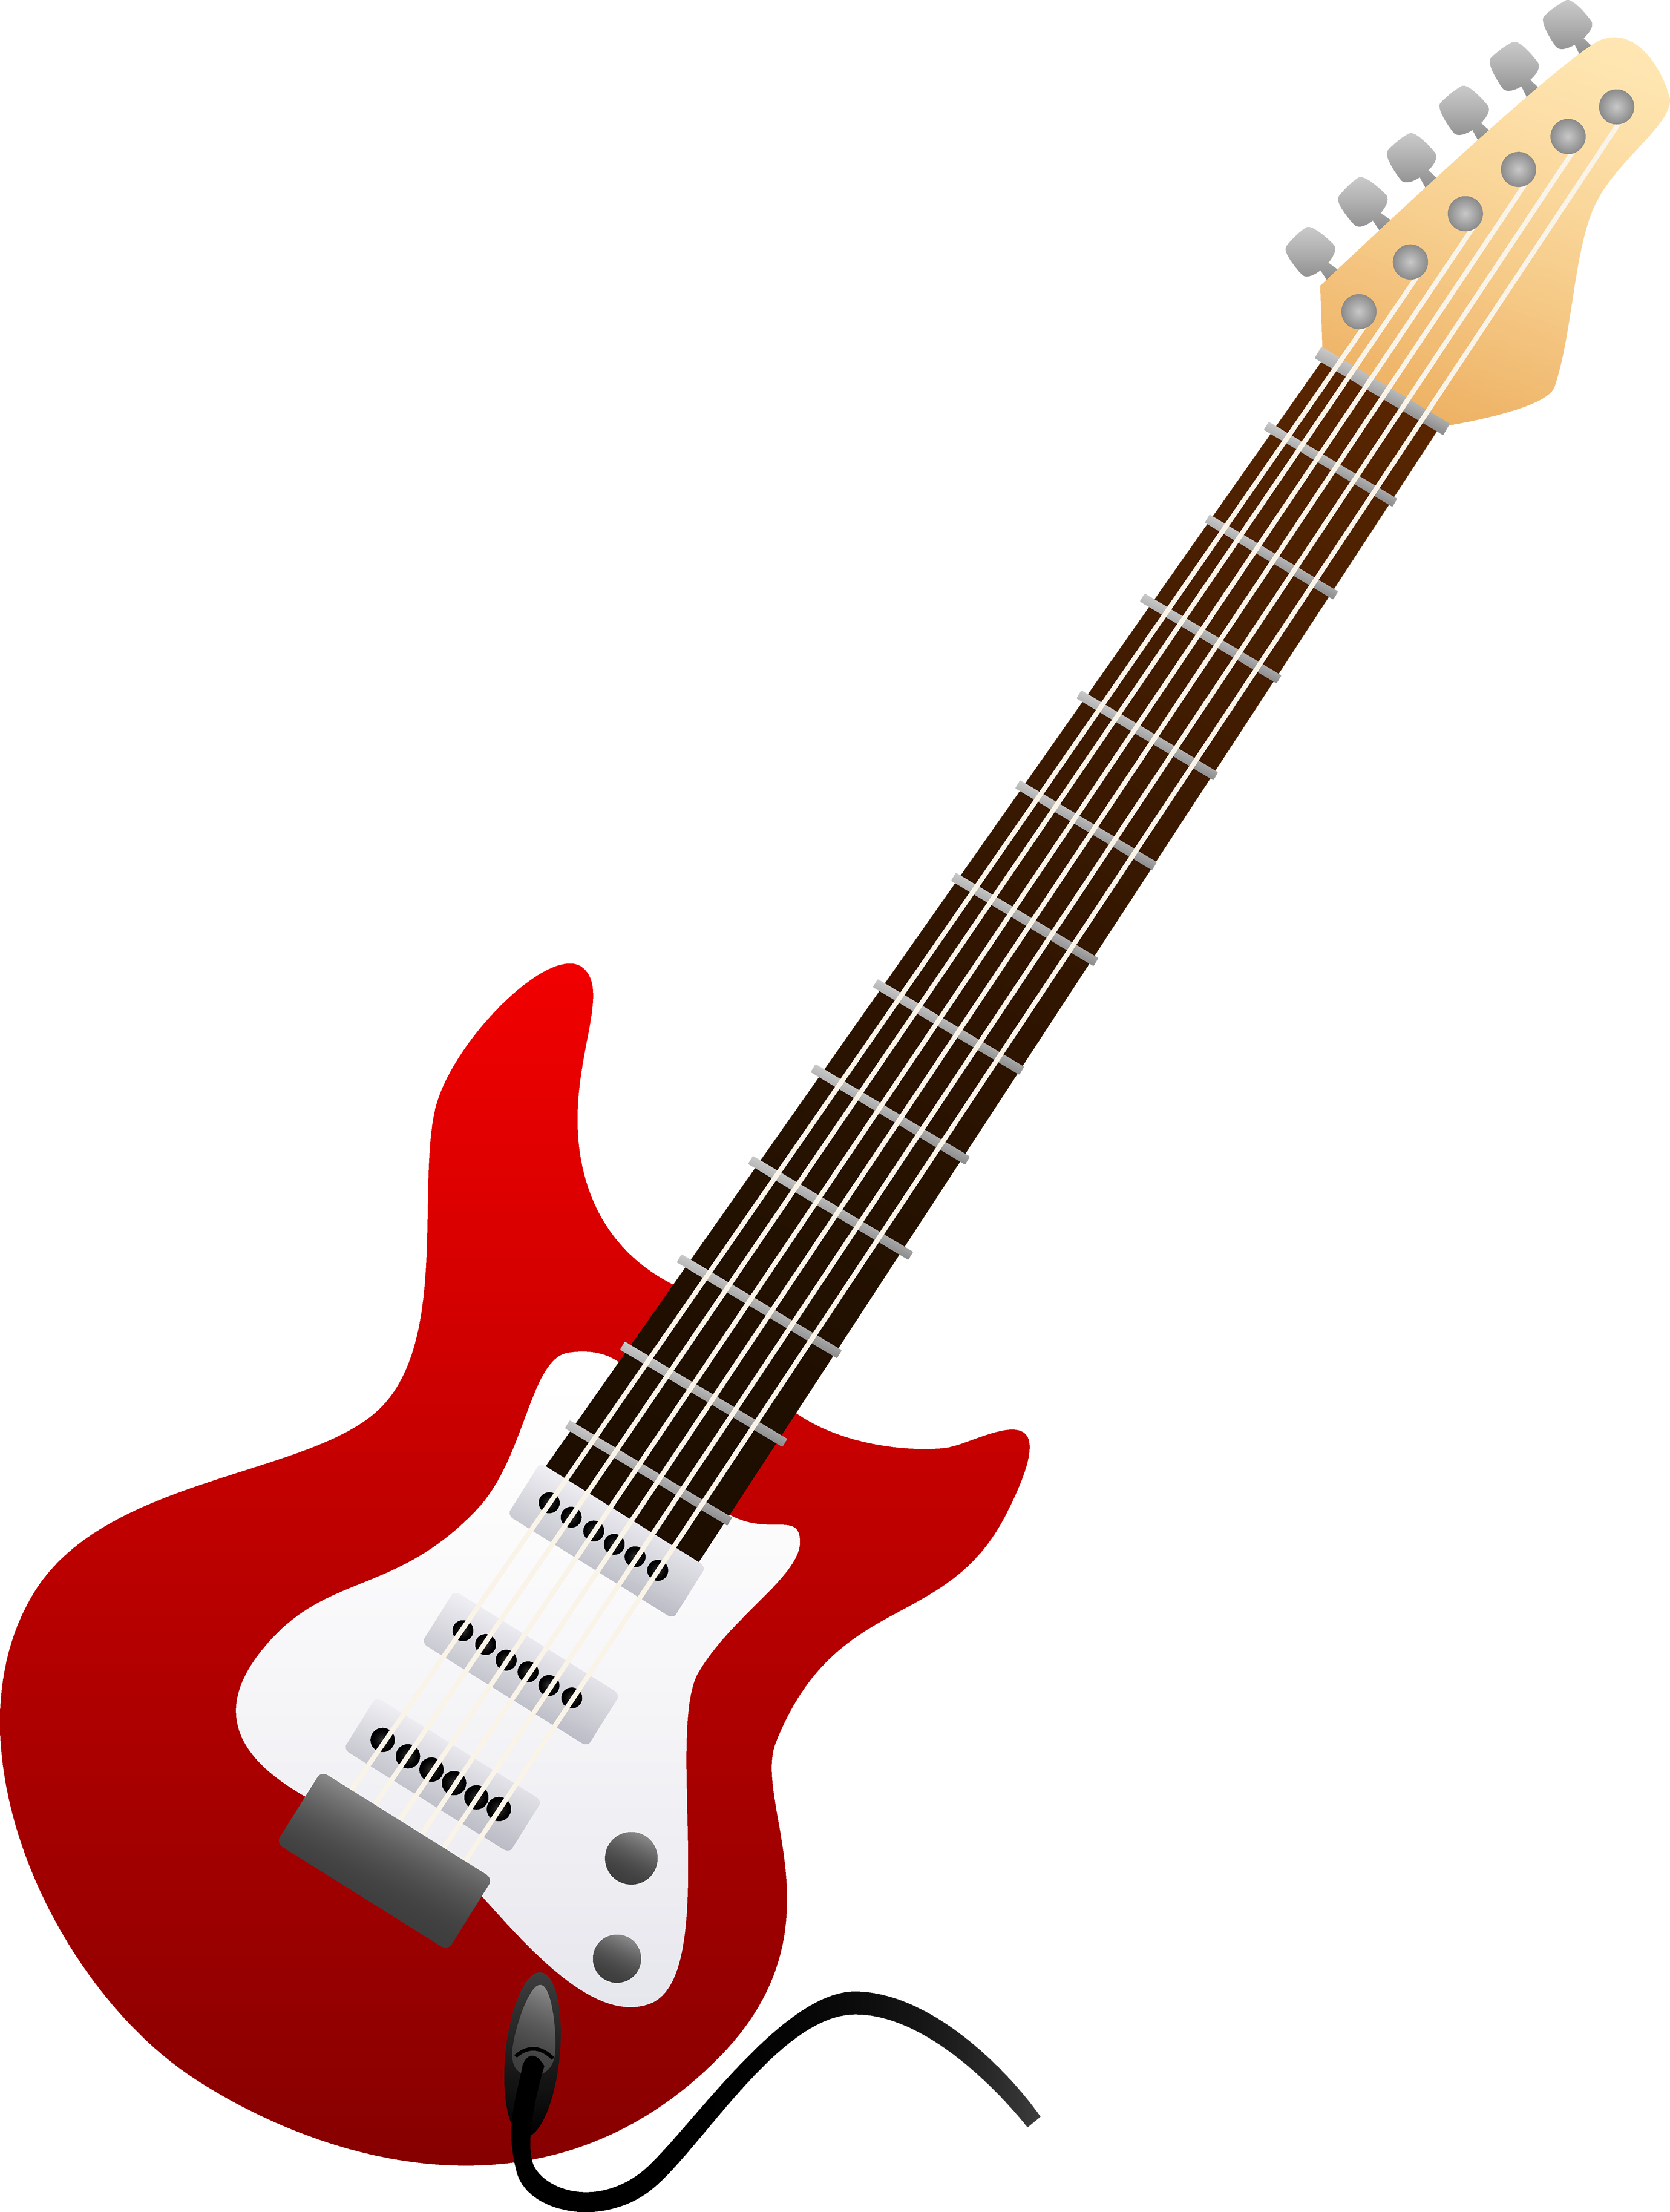 Red Neck Guitar PNG HD Quality